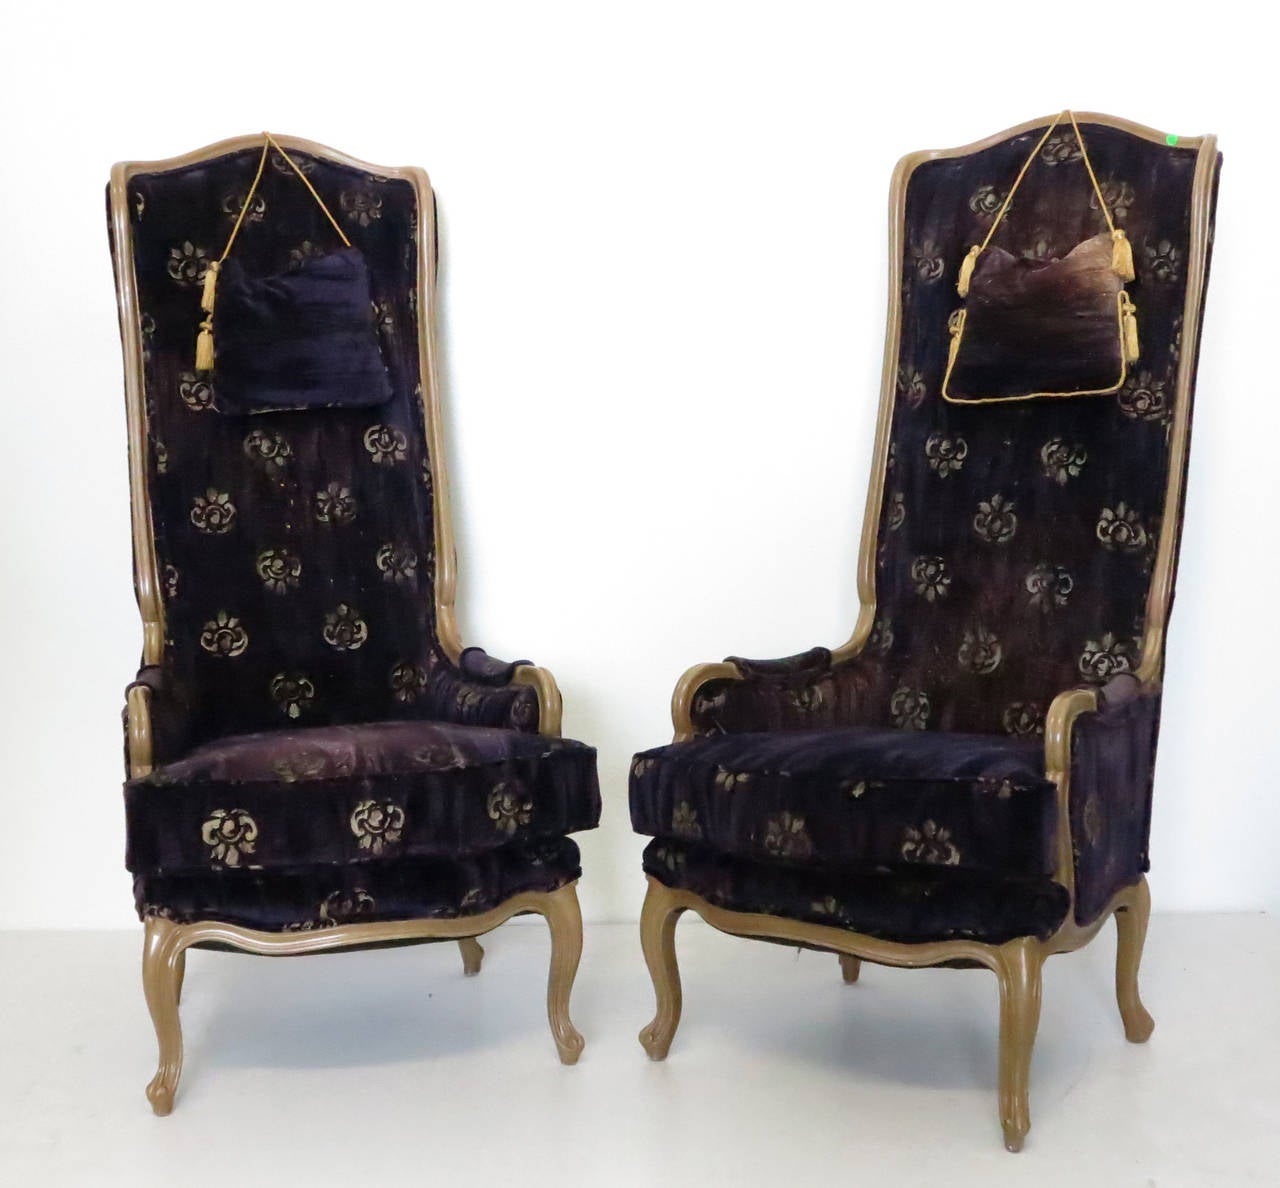 Beautiful pair of high back lounge chairs. Very pleasing lines would work in many different decors.